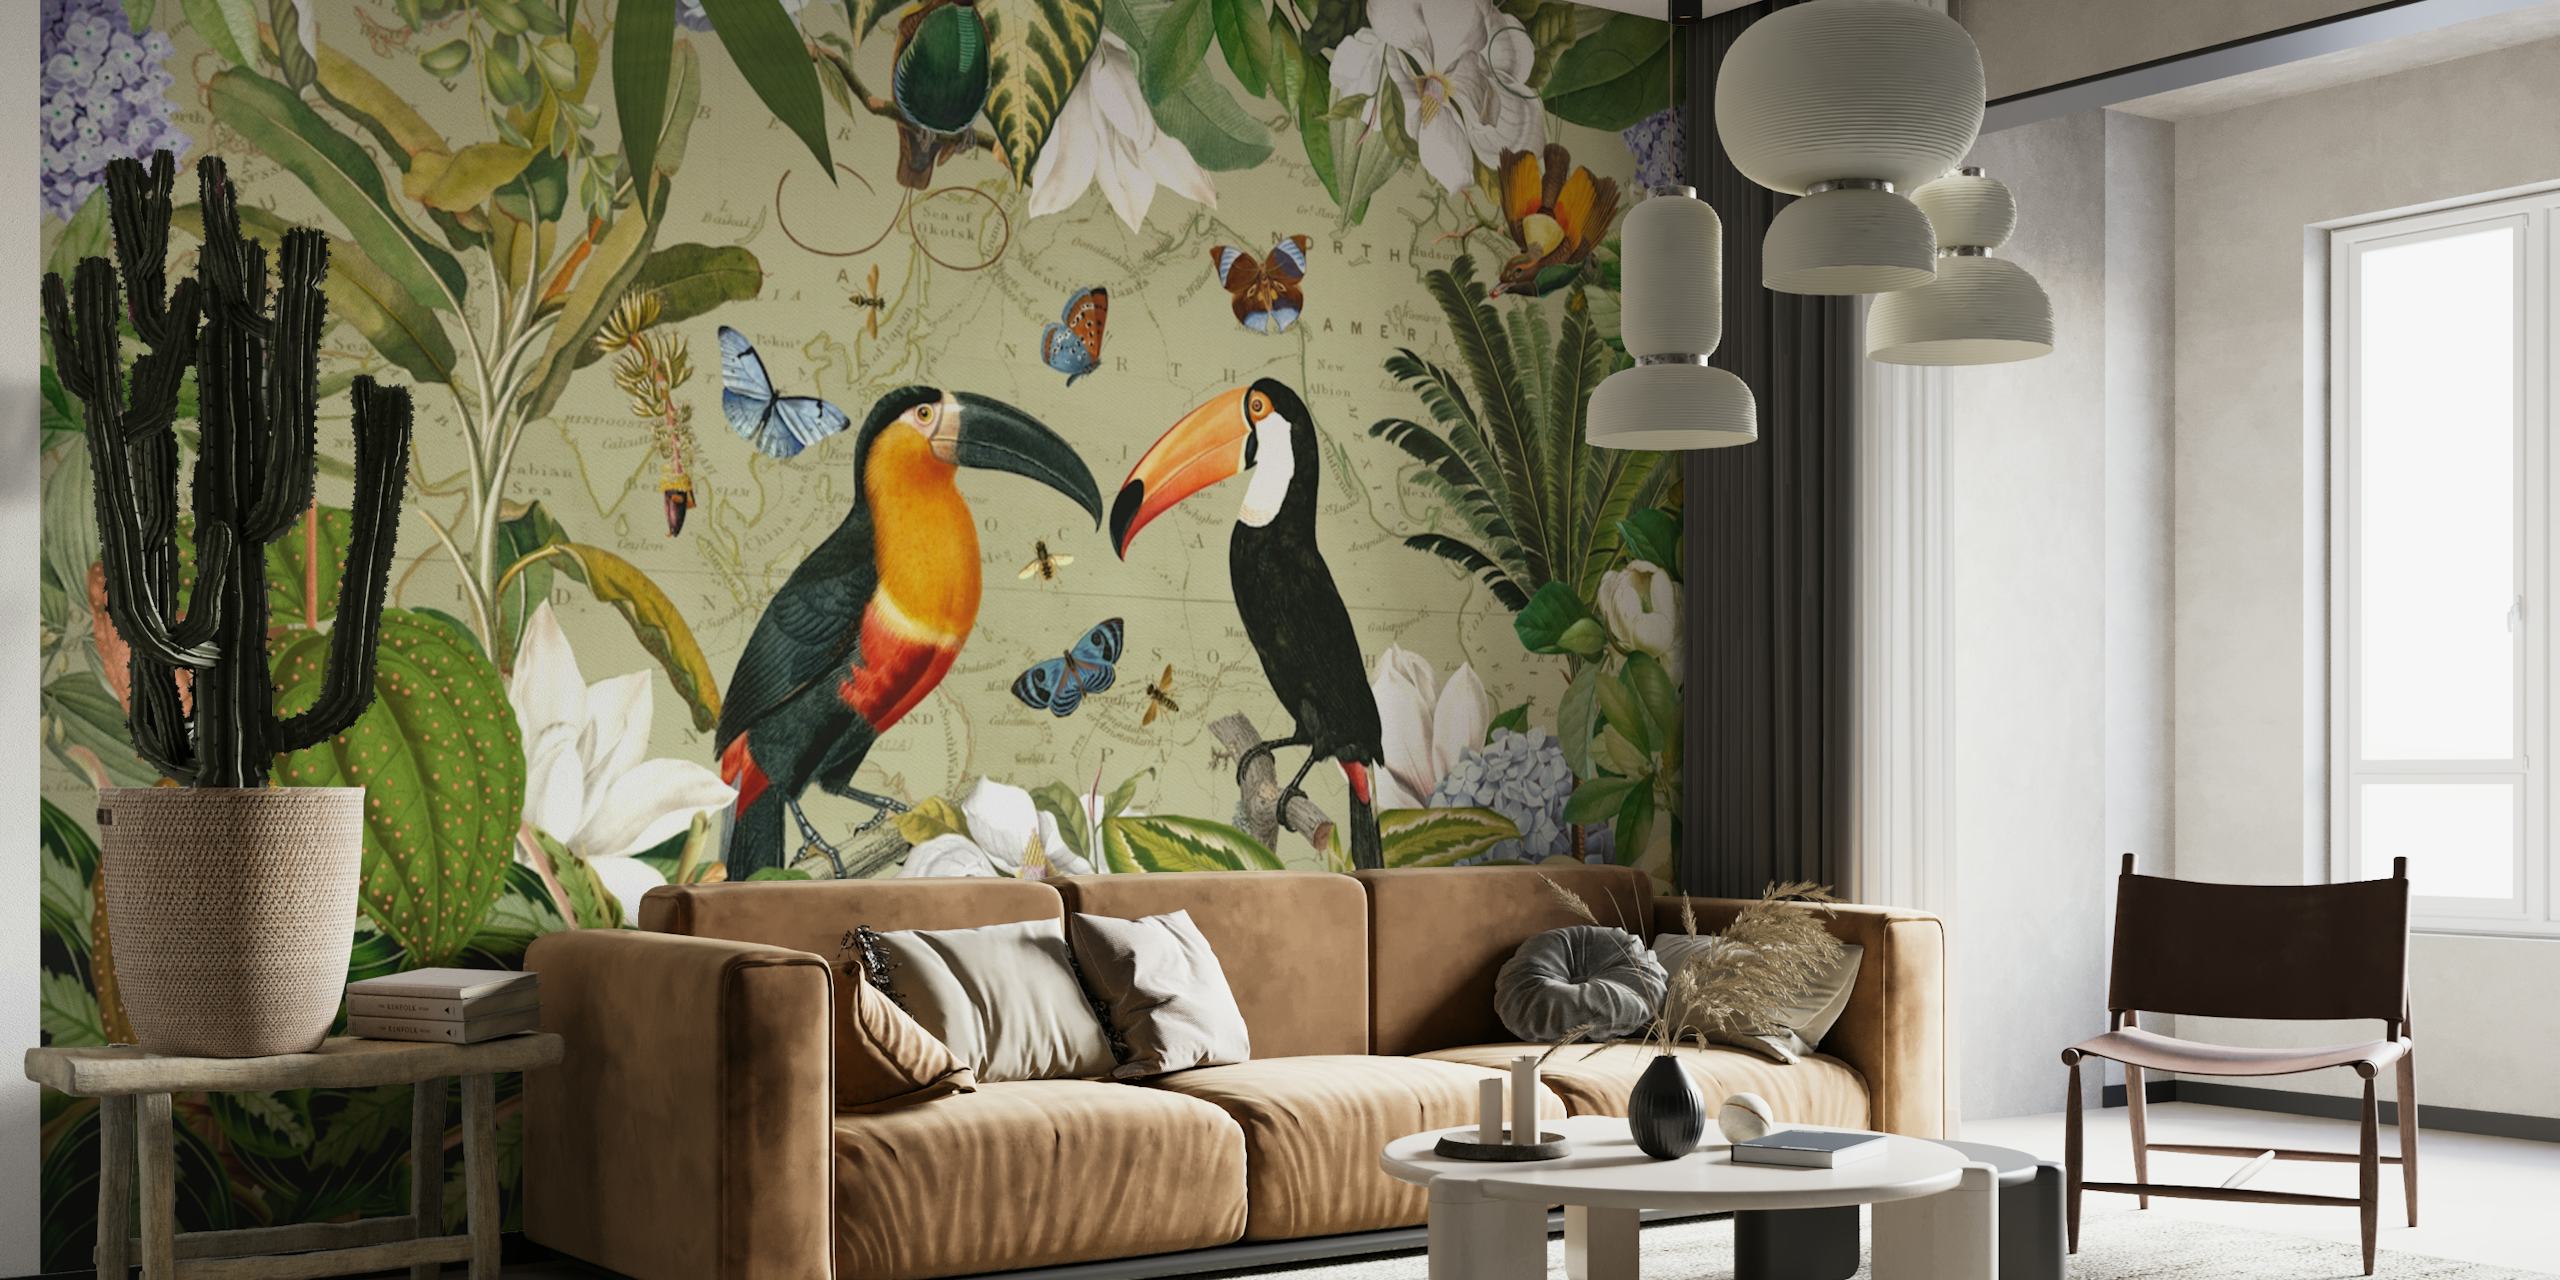 Exotic Toucan Adventure wall mural with colorful toucans and tropical foliage